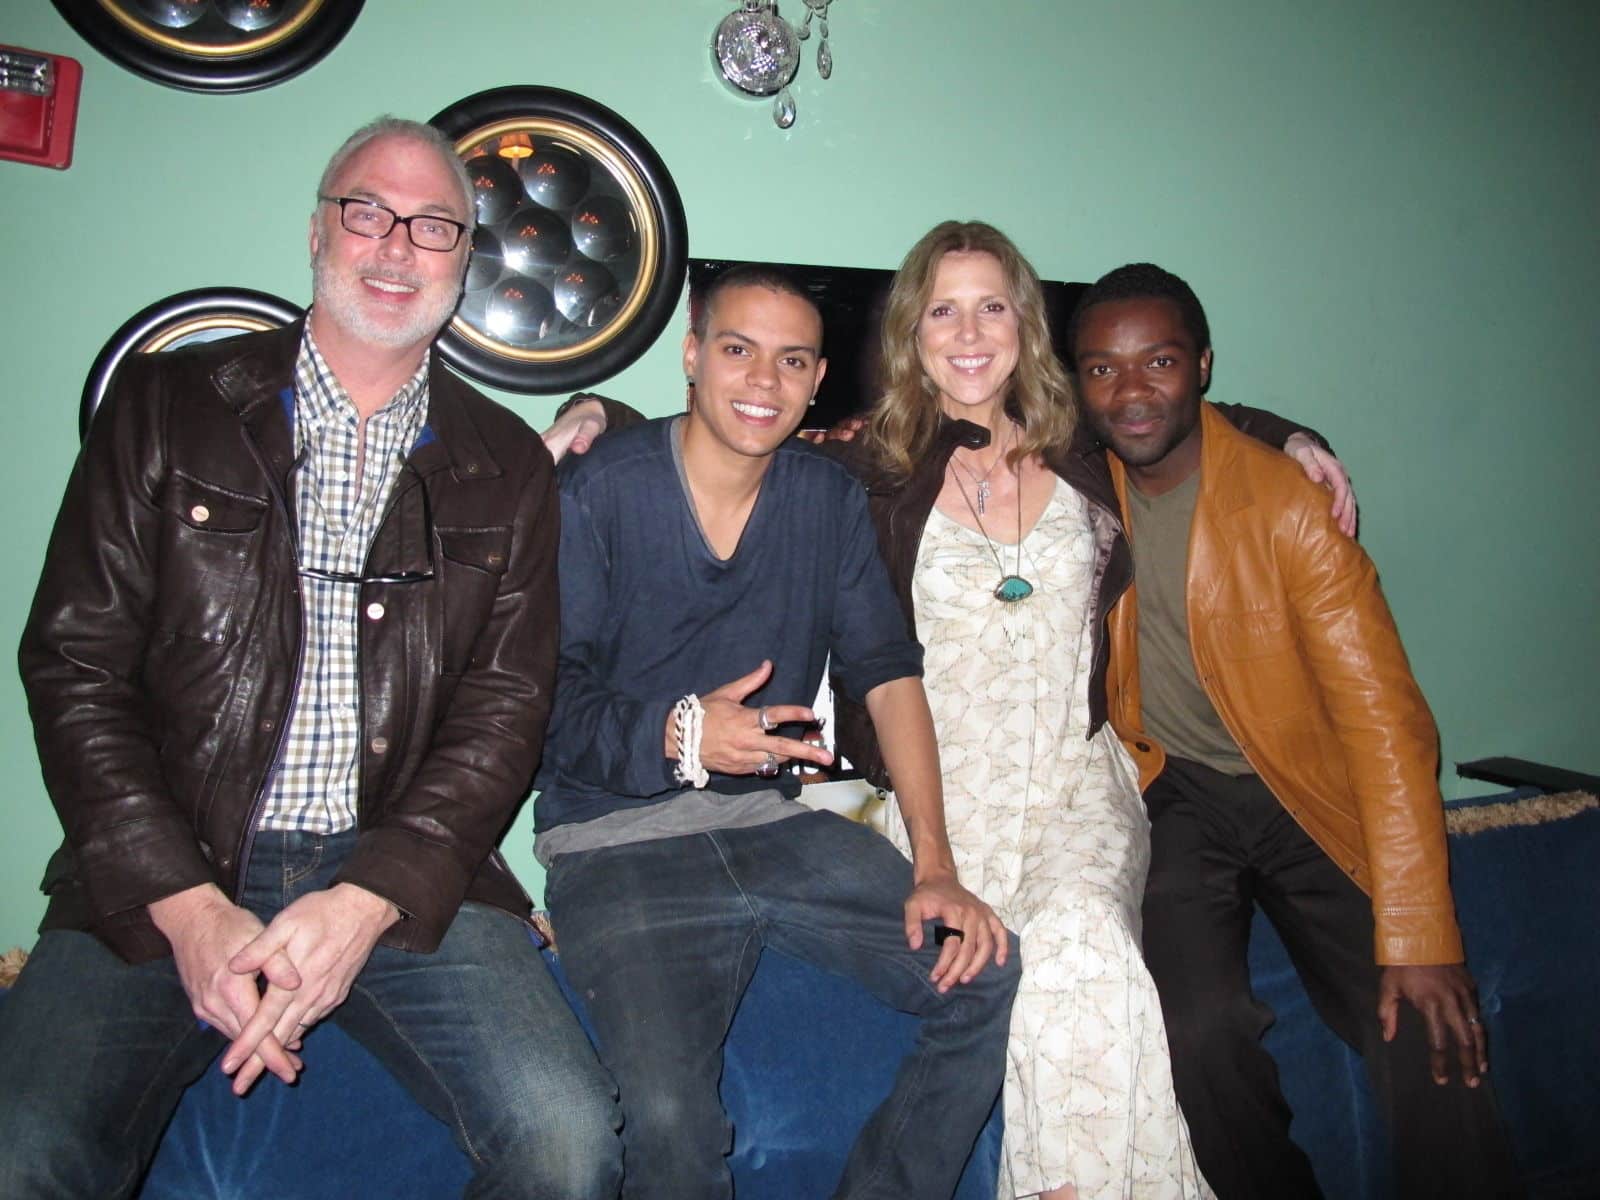 Dr. Gilreath, Evan Ross, Channie Gilreath and David Oyelowo at the film's premiere at the SXSW Film Festival in April 2011.